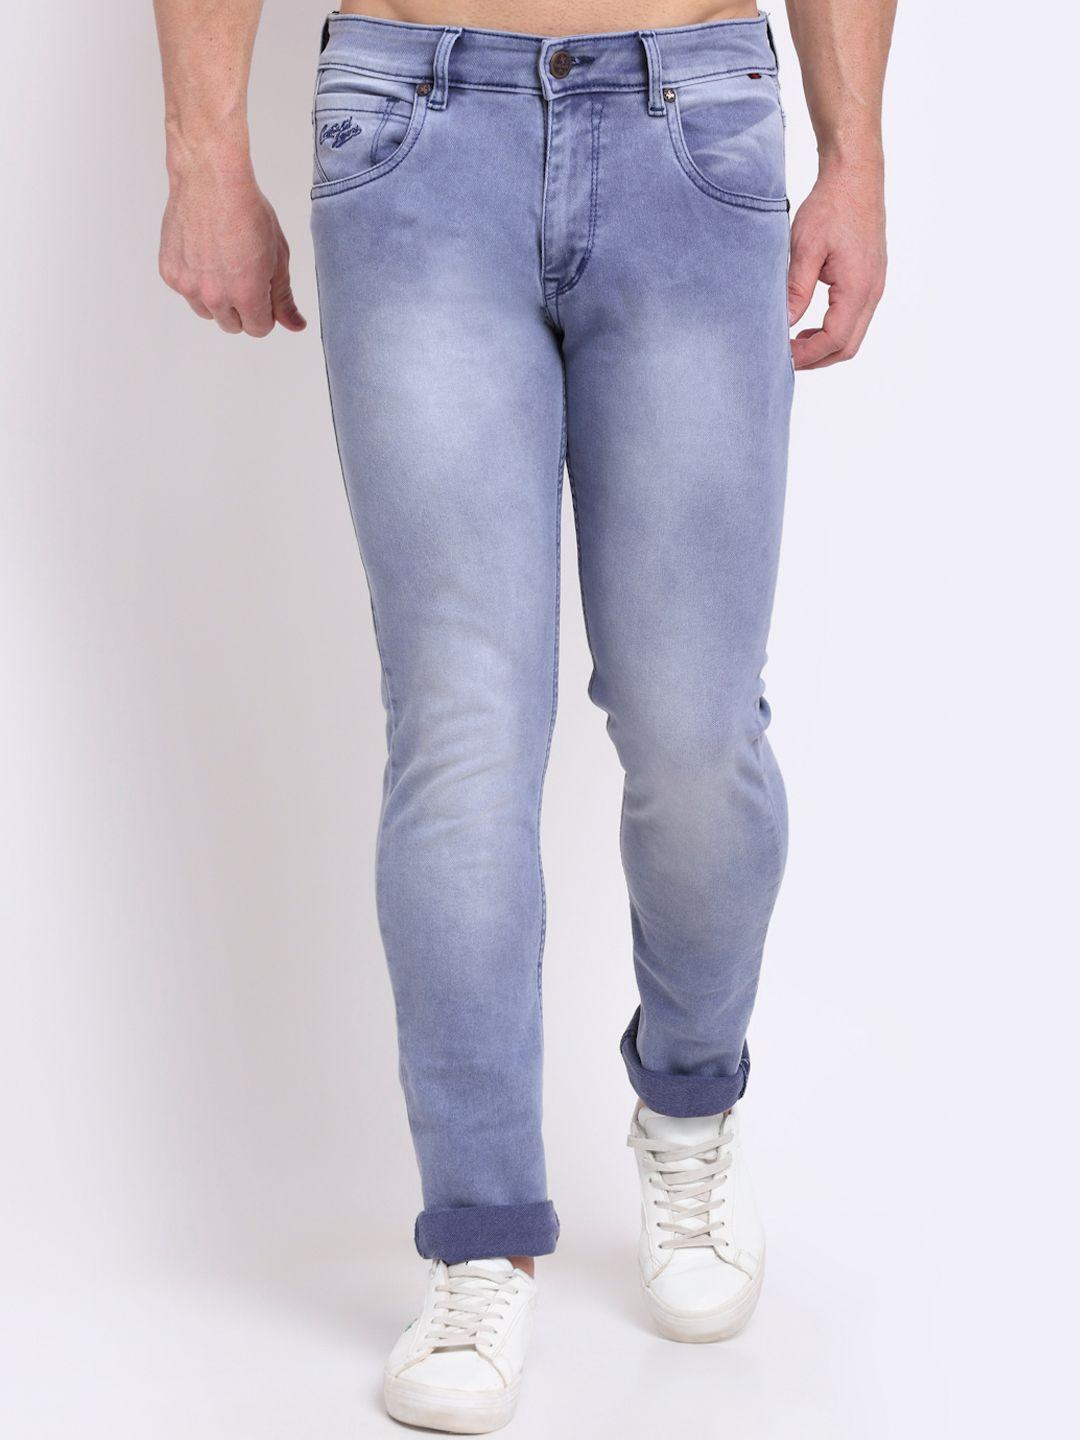 cantabil-men-mid-rise-heavy-fade-stretchable-cotton-jeans